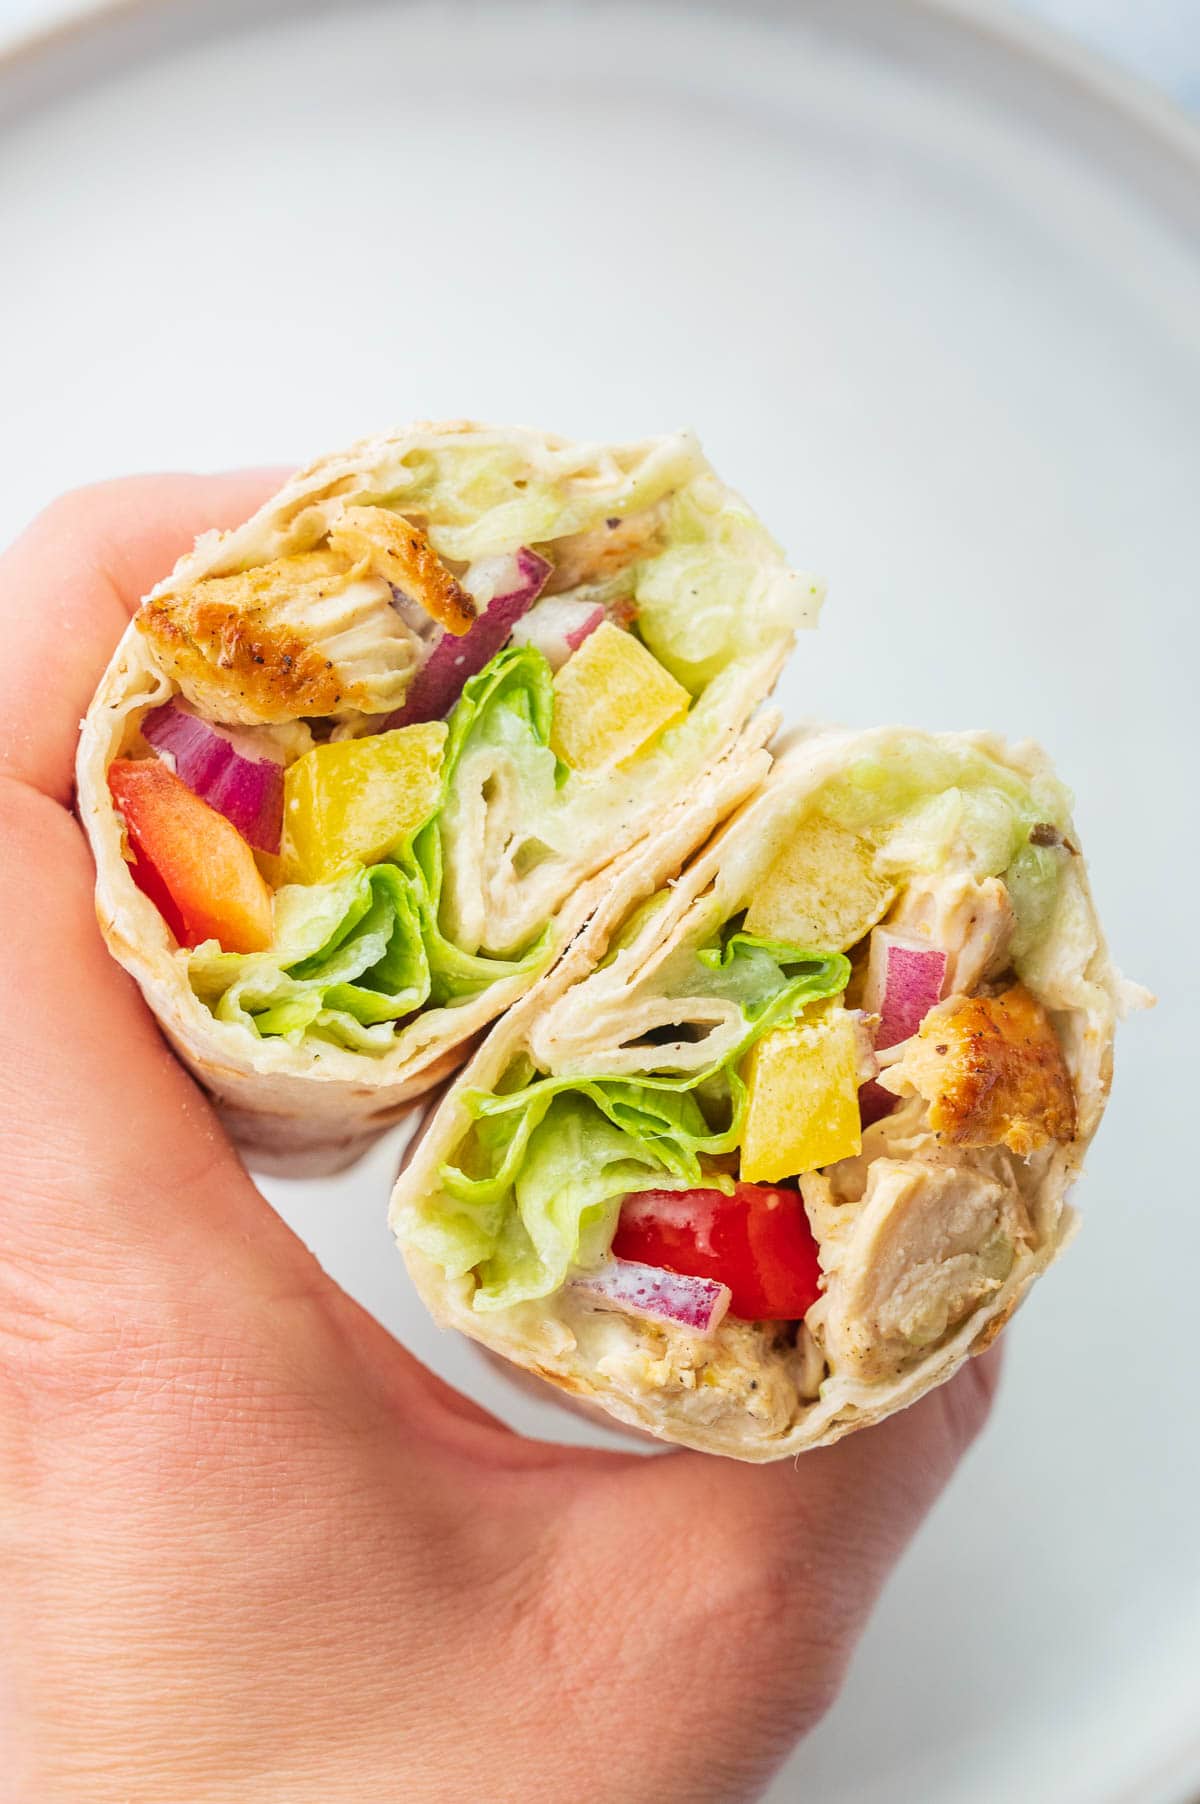 Two cut in half Greek chicken wraps are being held in a hand.